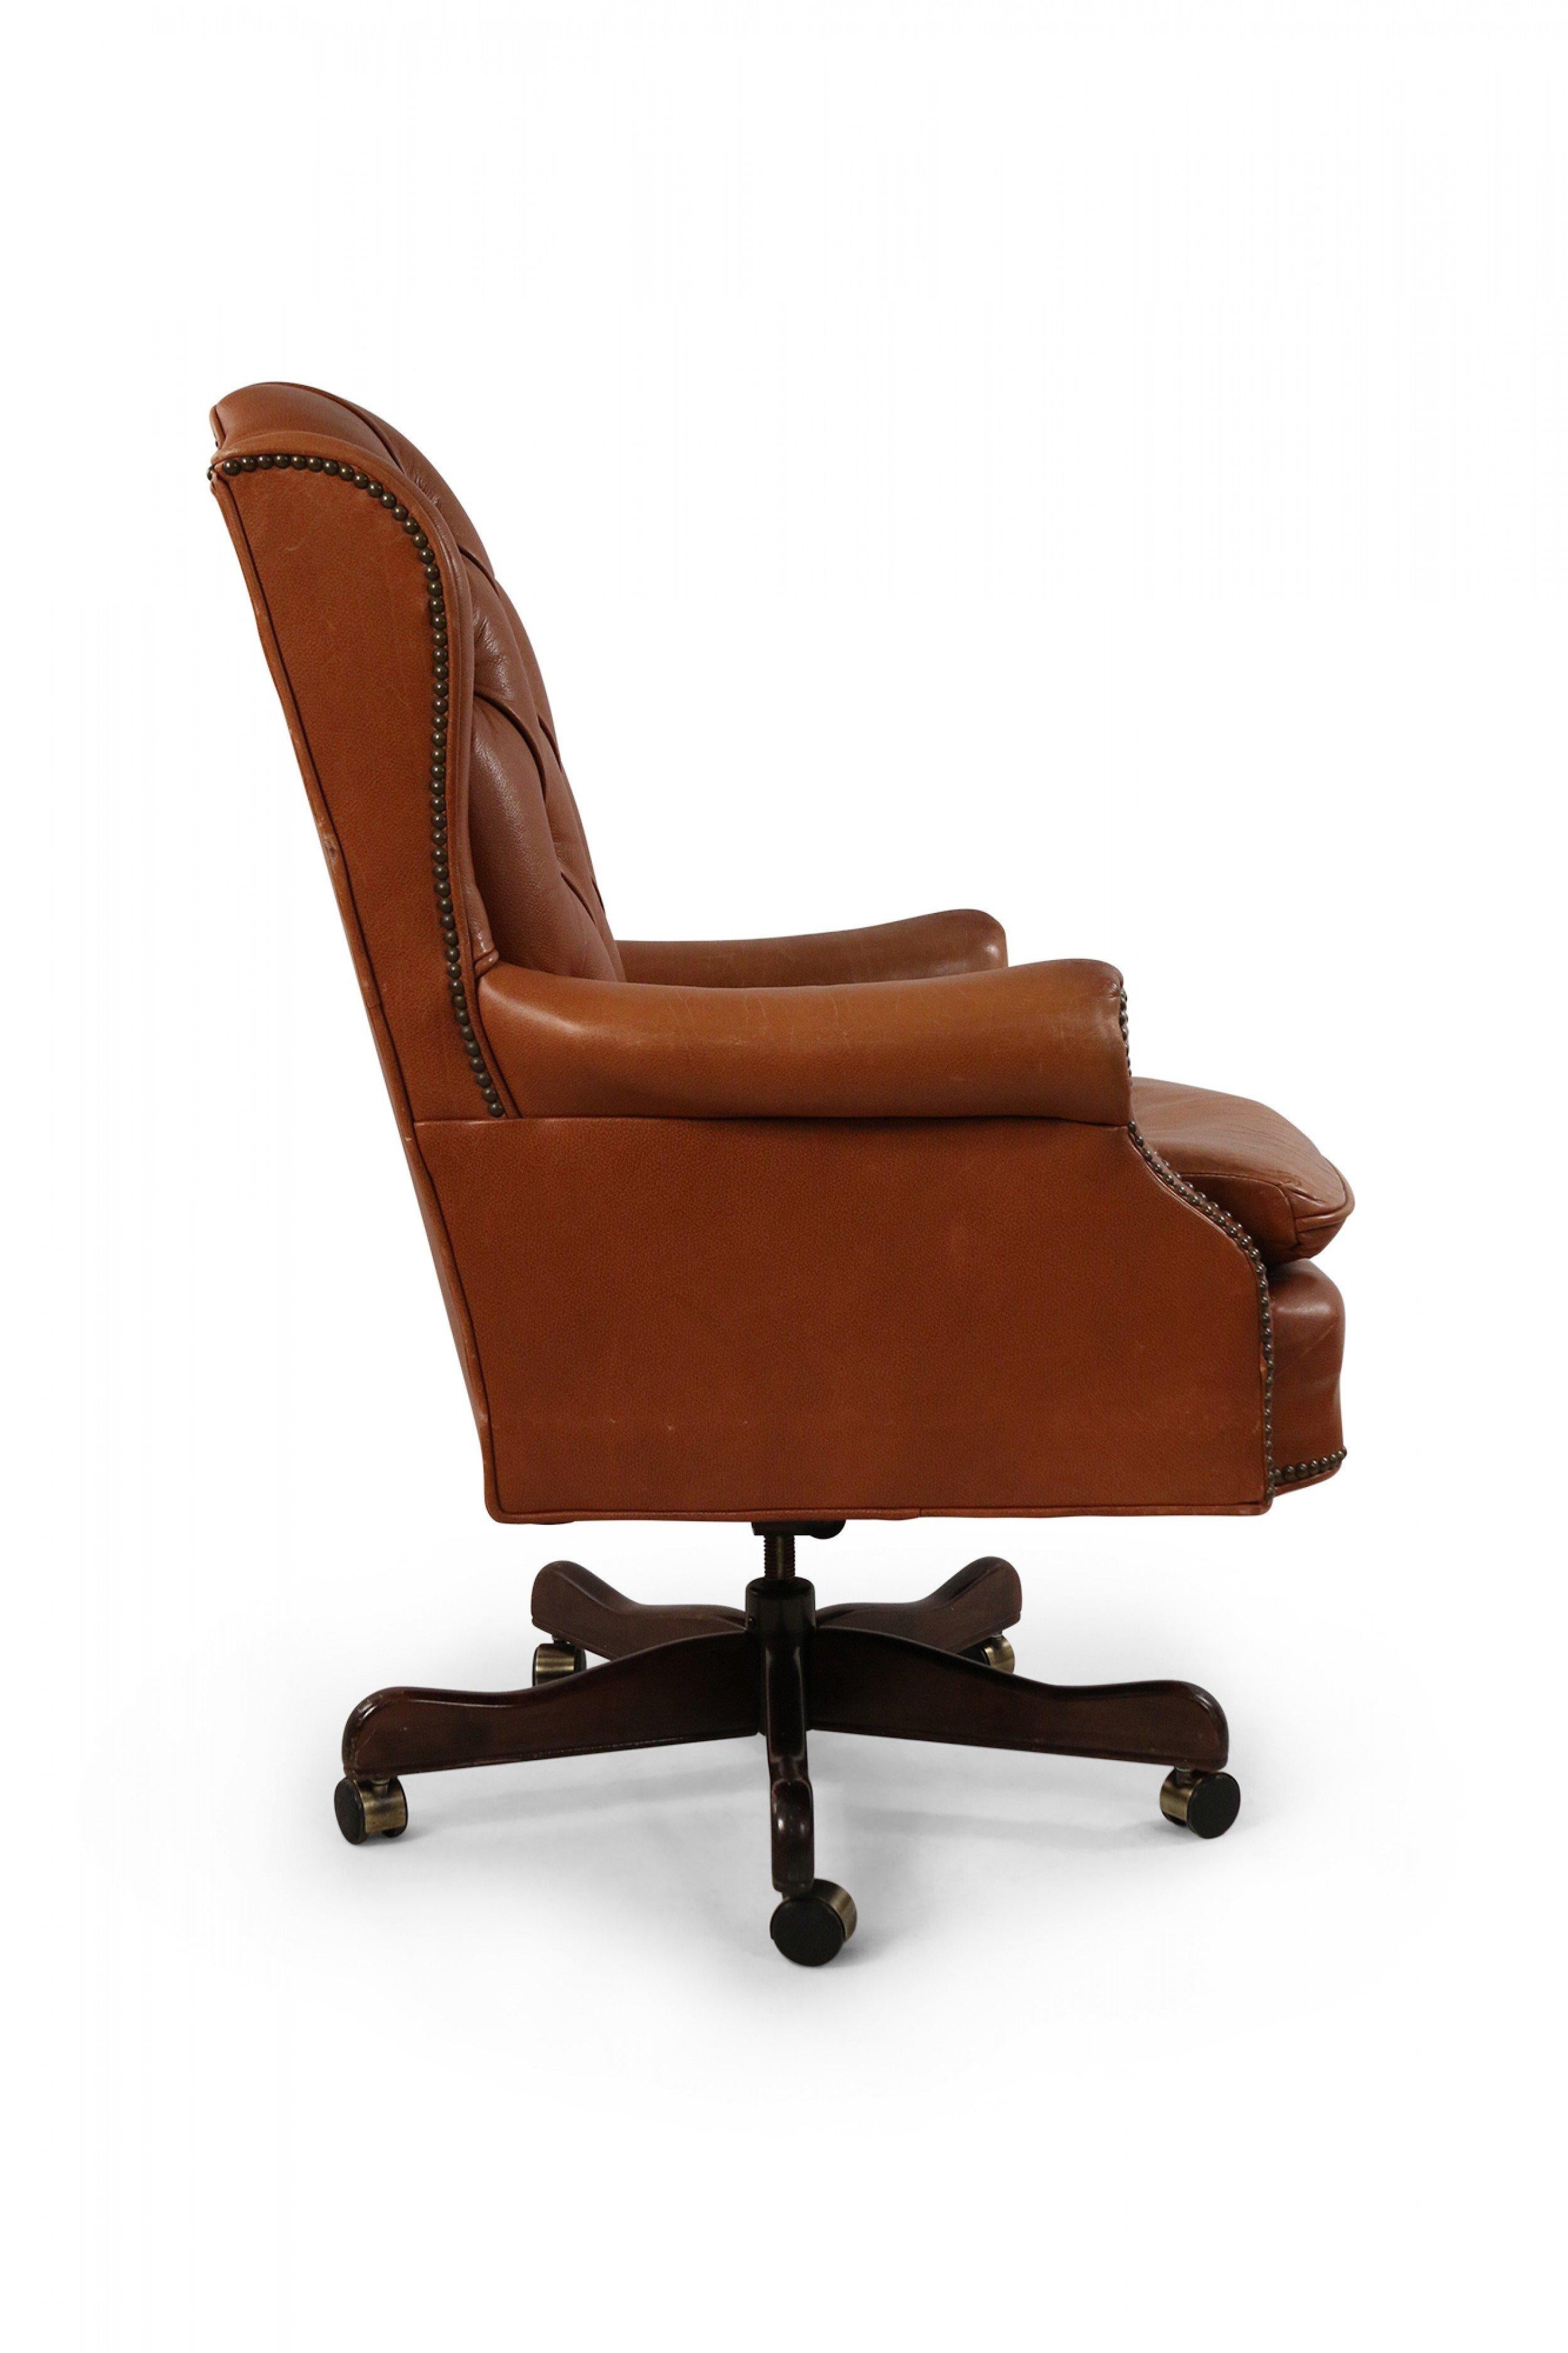 Mid-Century American Brown Tufted Leather Swivel Office / Armchair For Sale 4